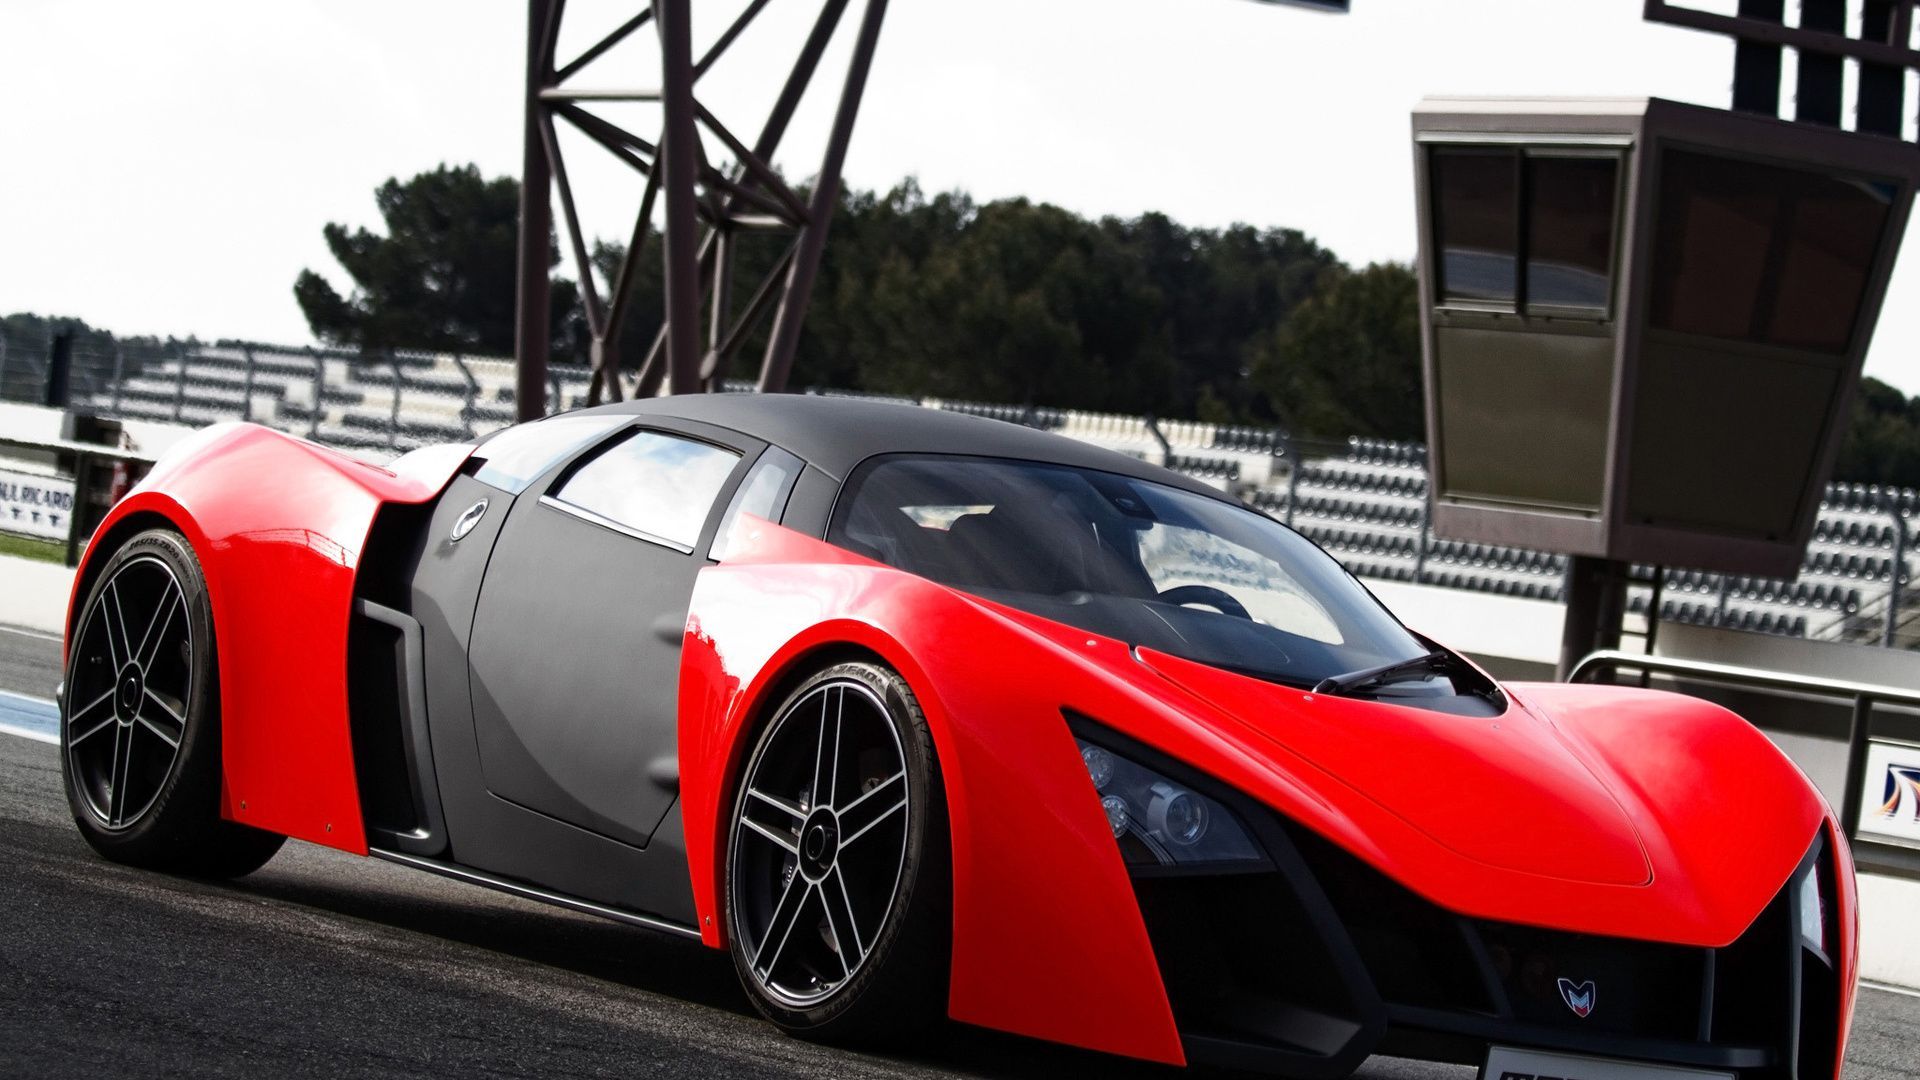 Top Red Sports Car Wallpaper Images for Pinterest